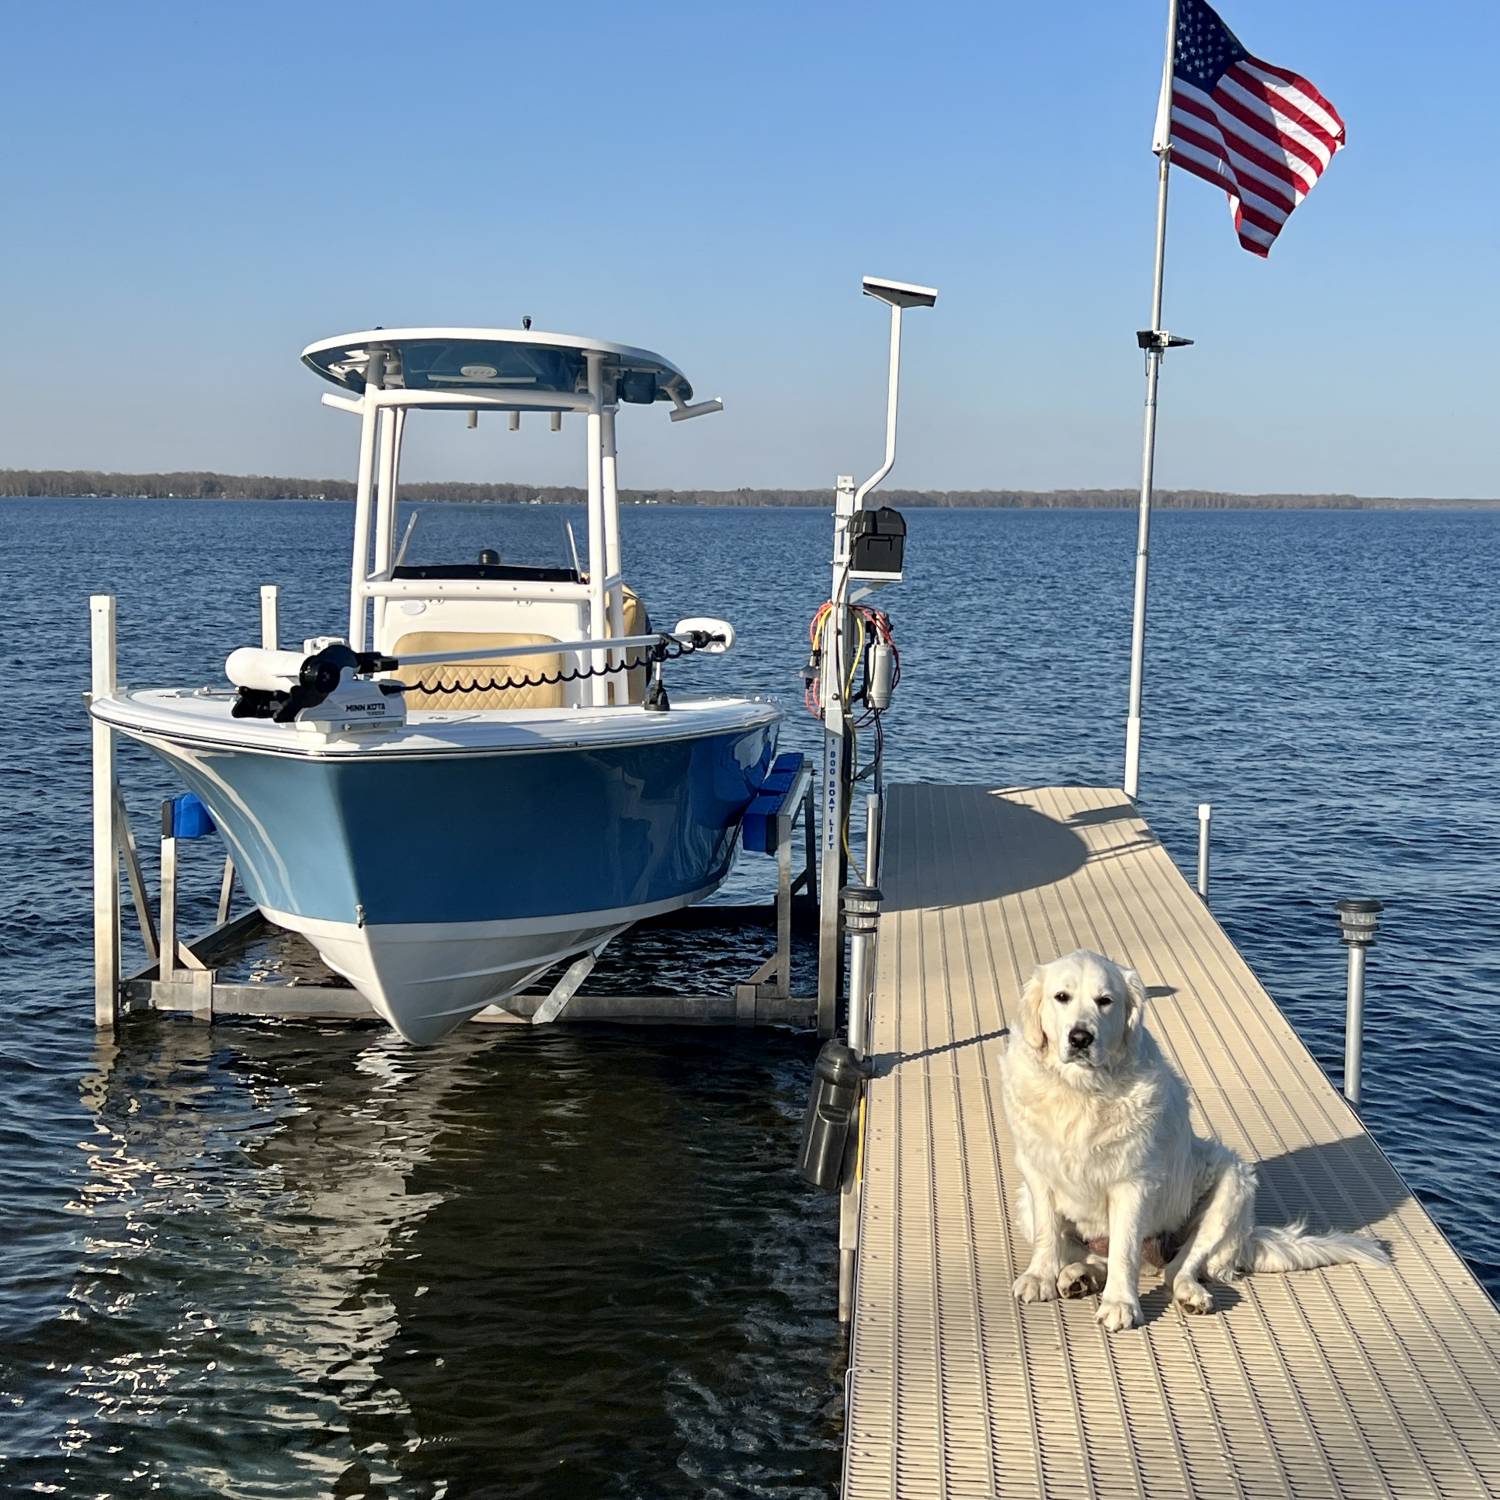 Title: Season Begins - On board their Sportsman Open 212 Center Console - Location: Oneida Lake. Participating in the Photo Contest #SportsmanApril2023